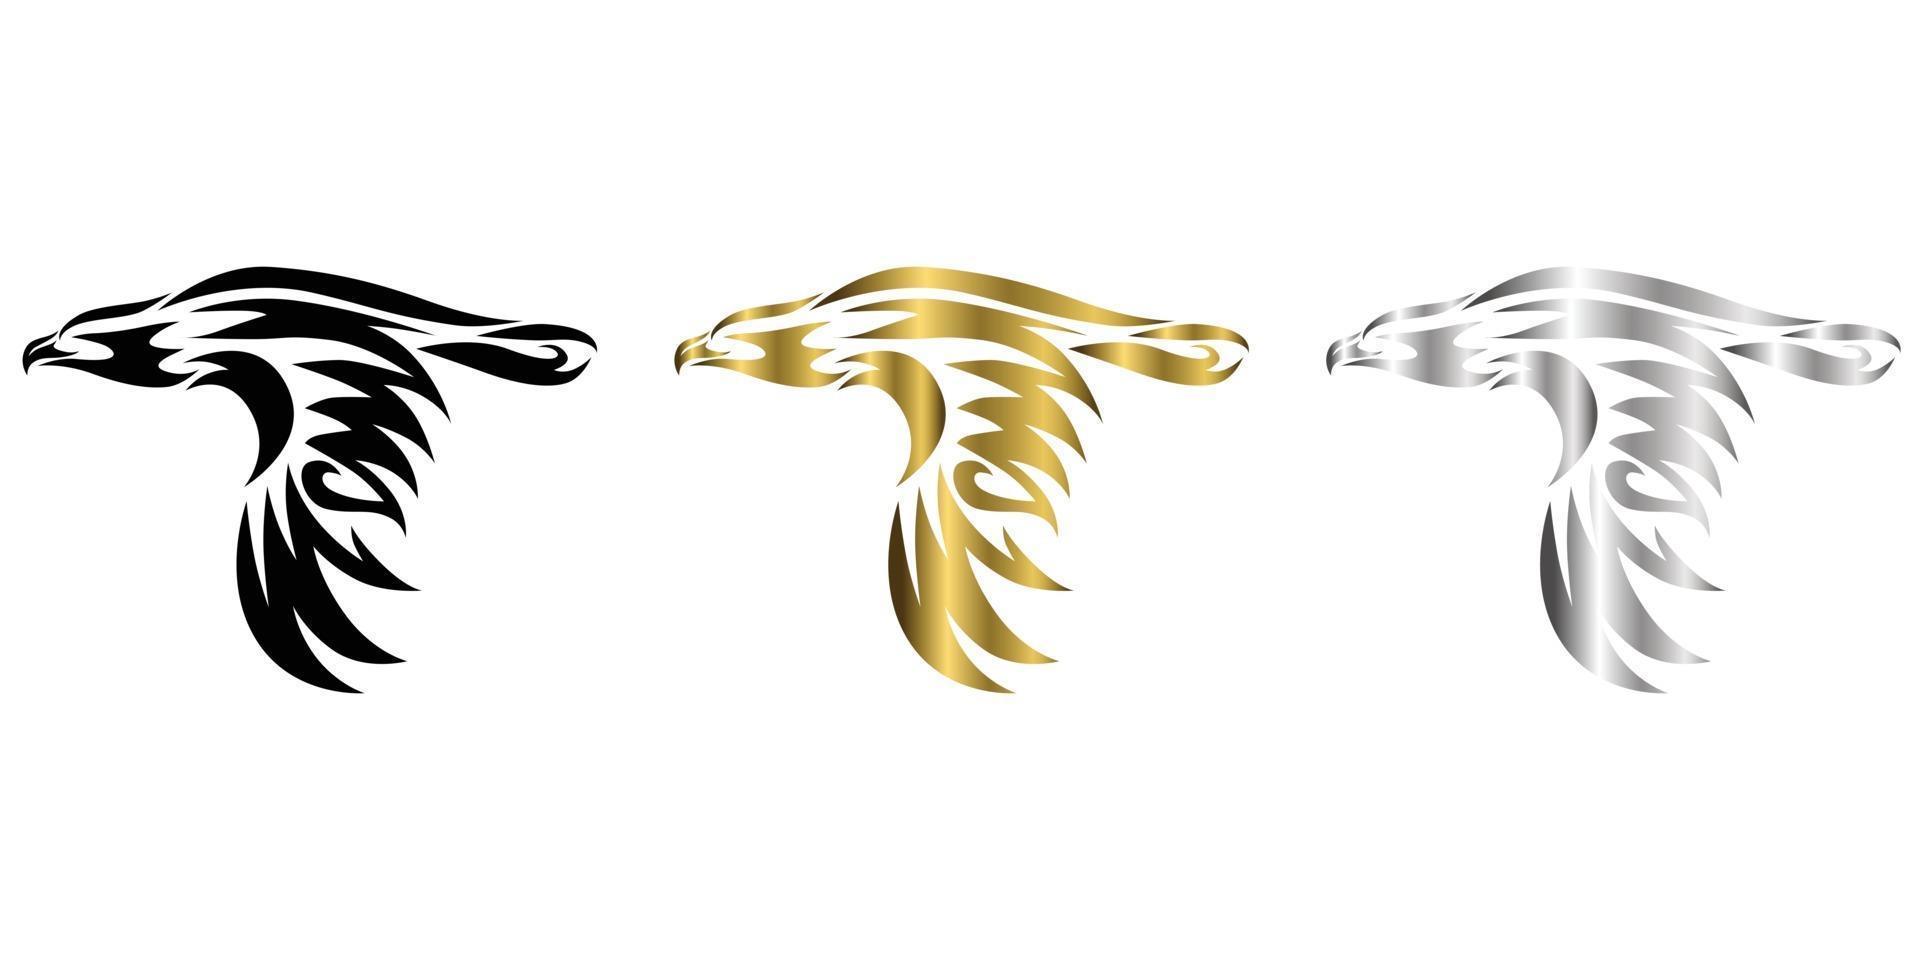 three color black gold silver Line art vector illustrator of eagle that is flying